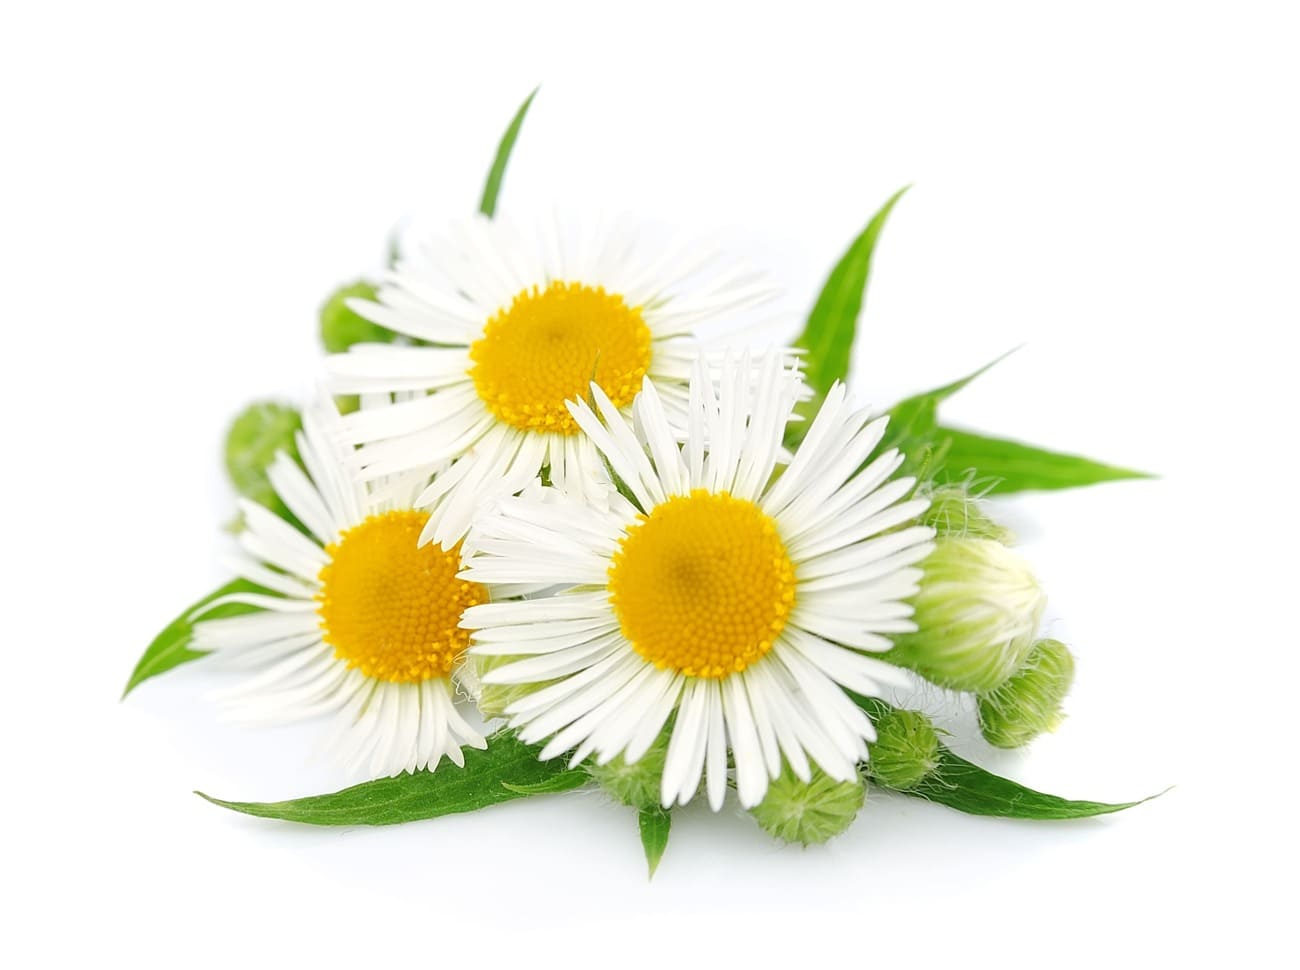 Chamomile(32x - Subscription Only)